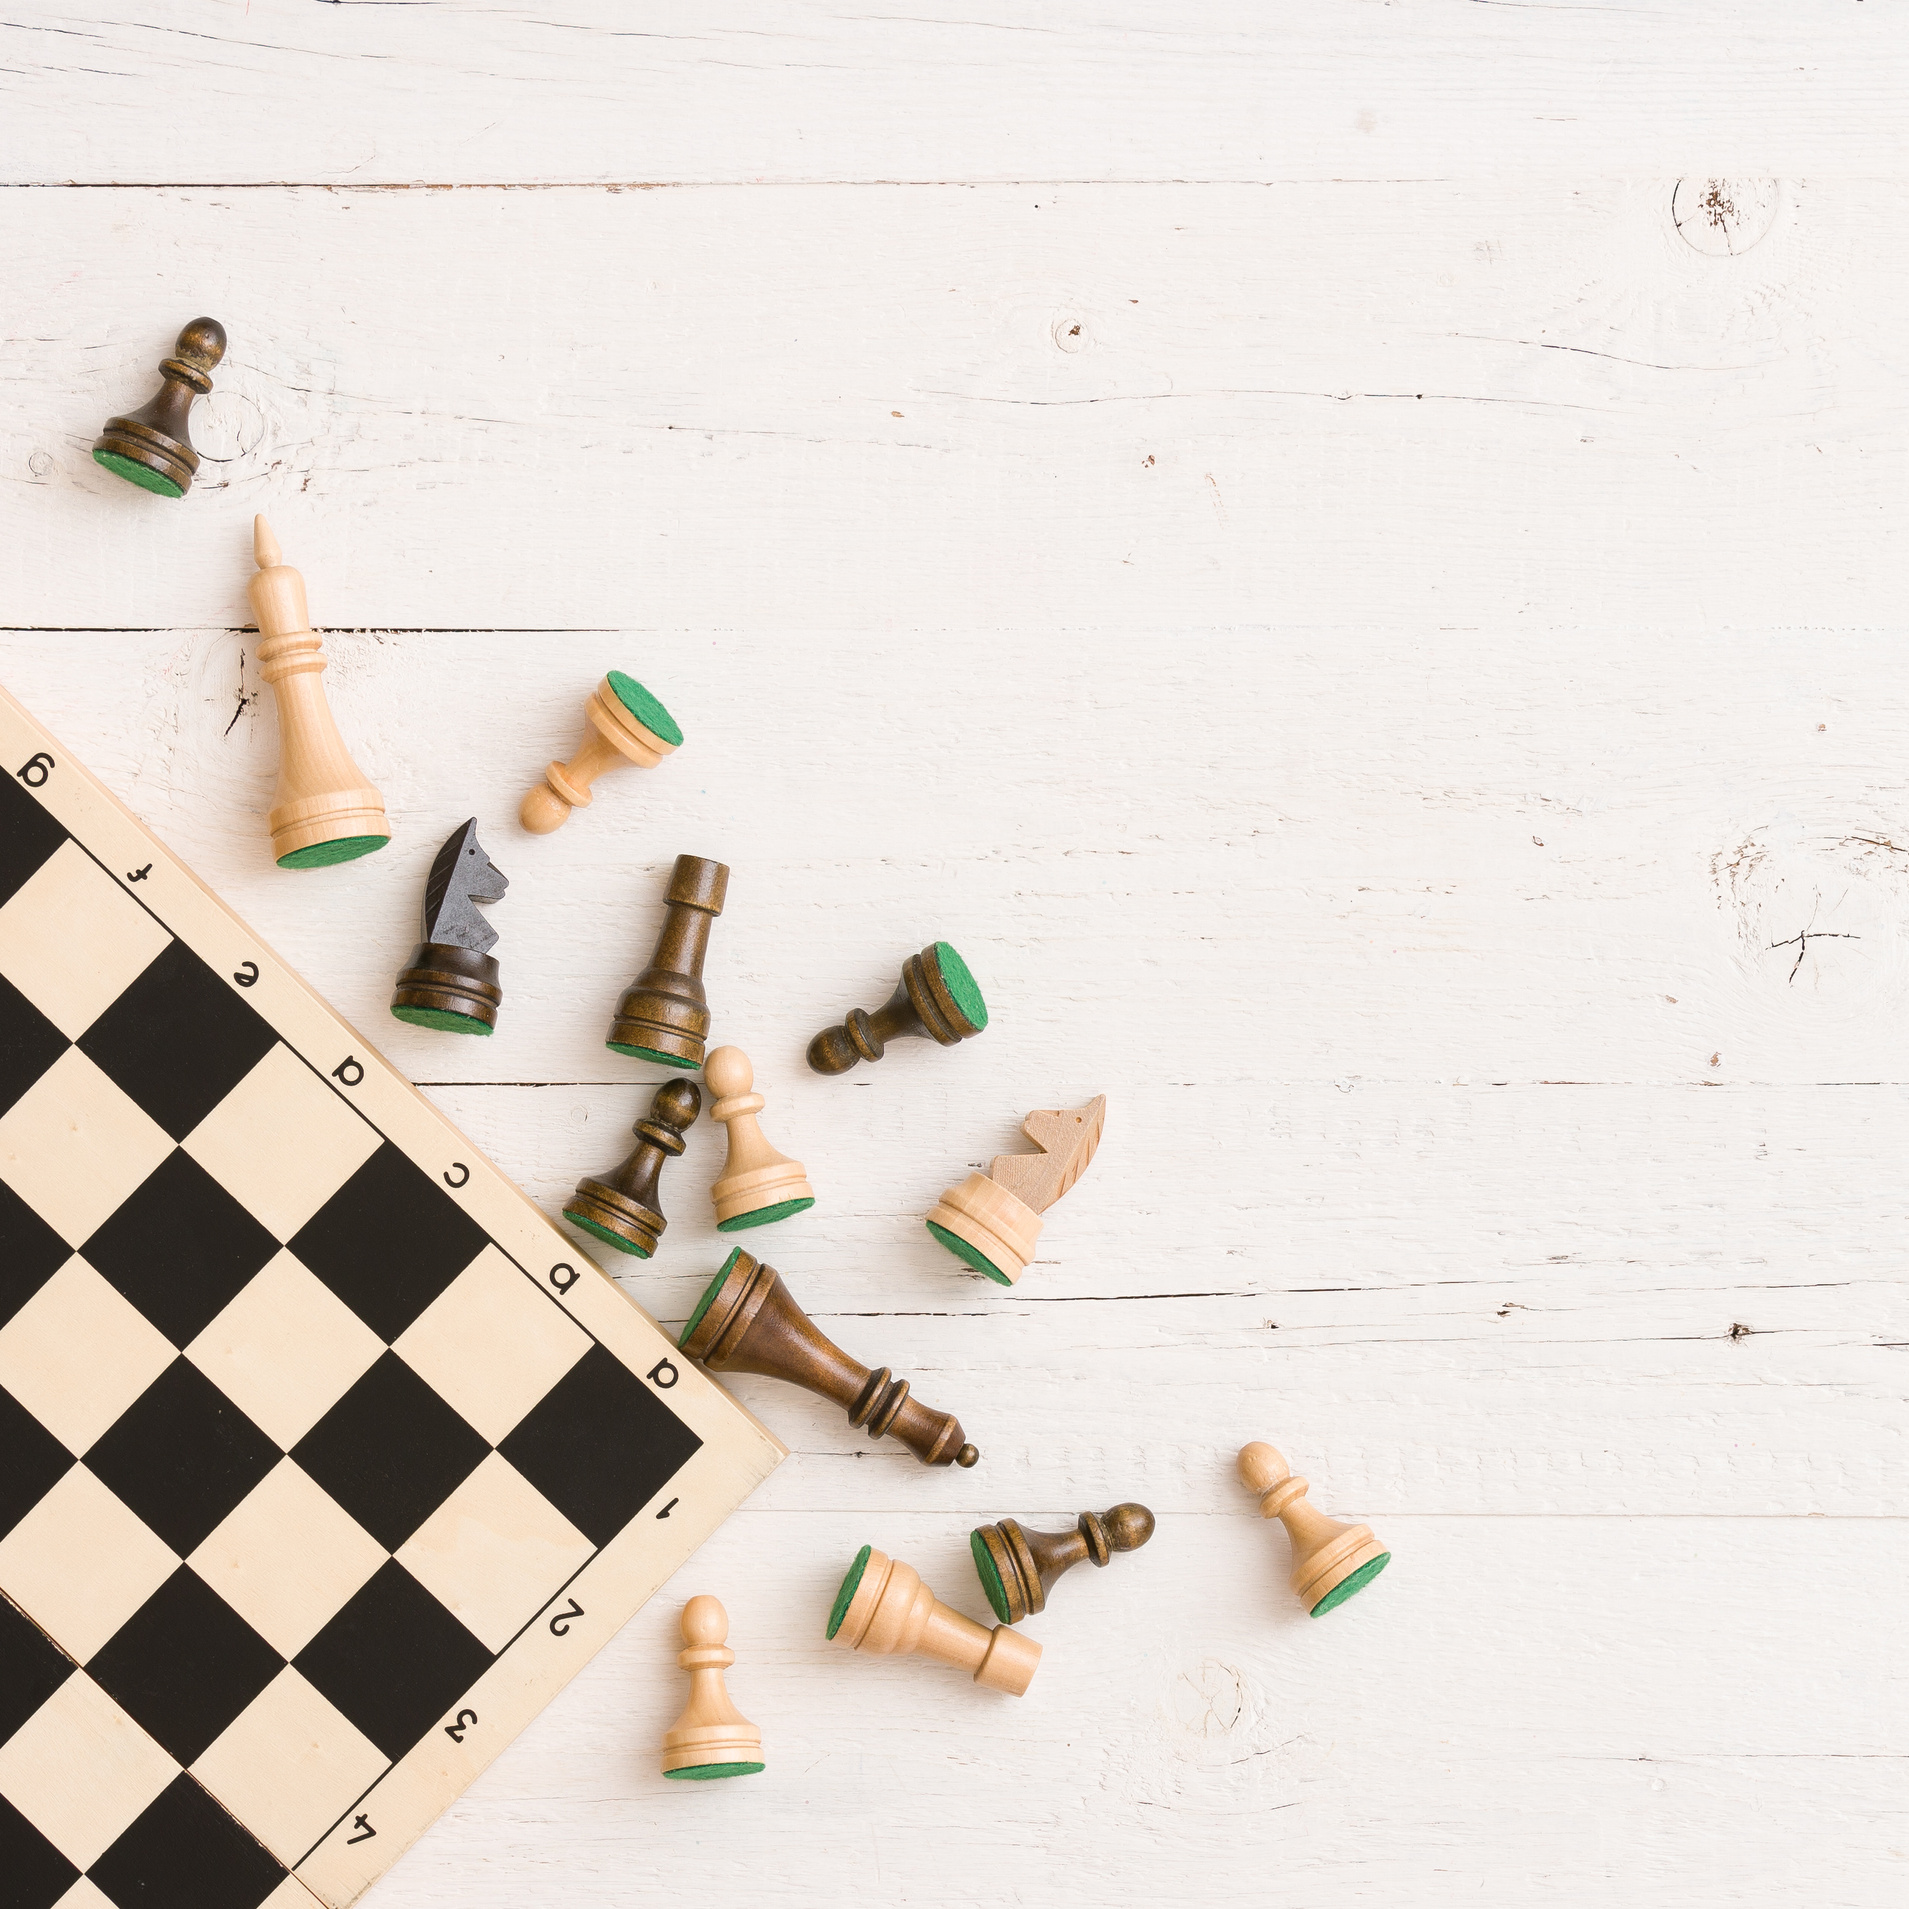 Wooden chess figures and chess board on white table background. Top view.